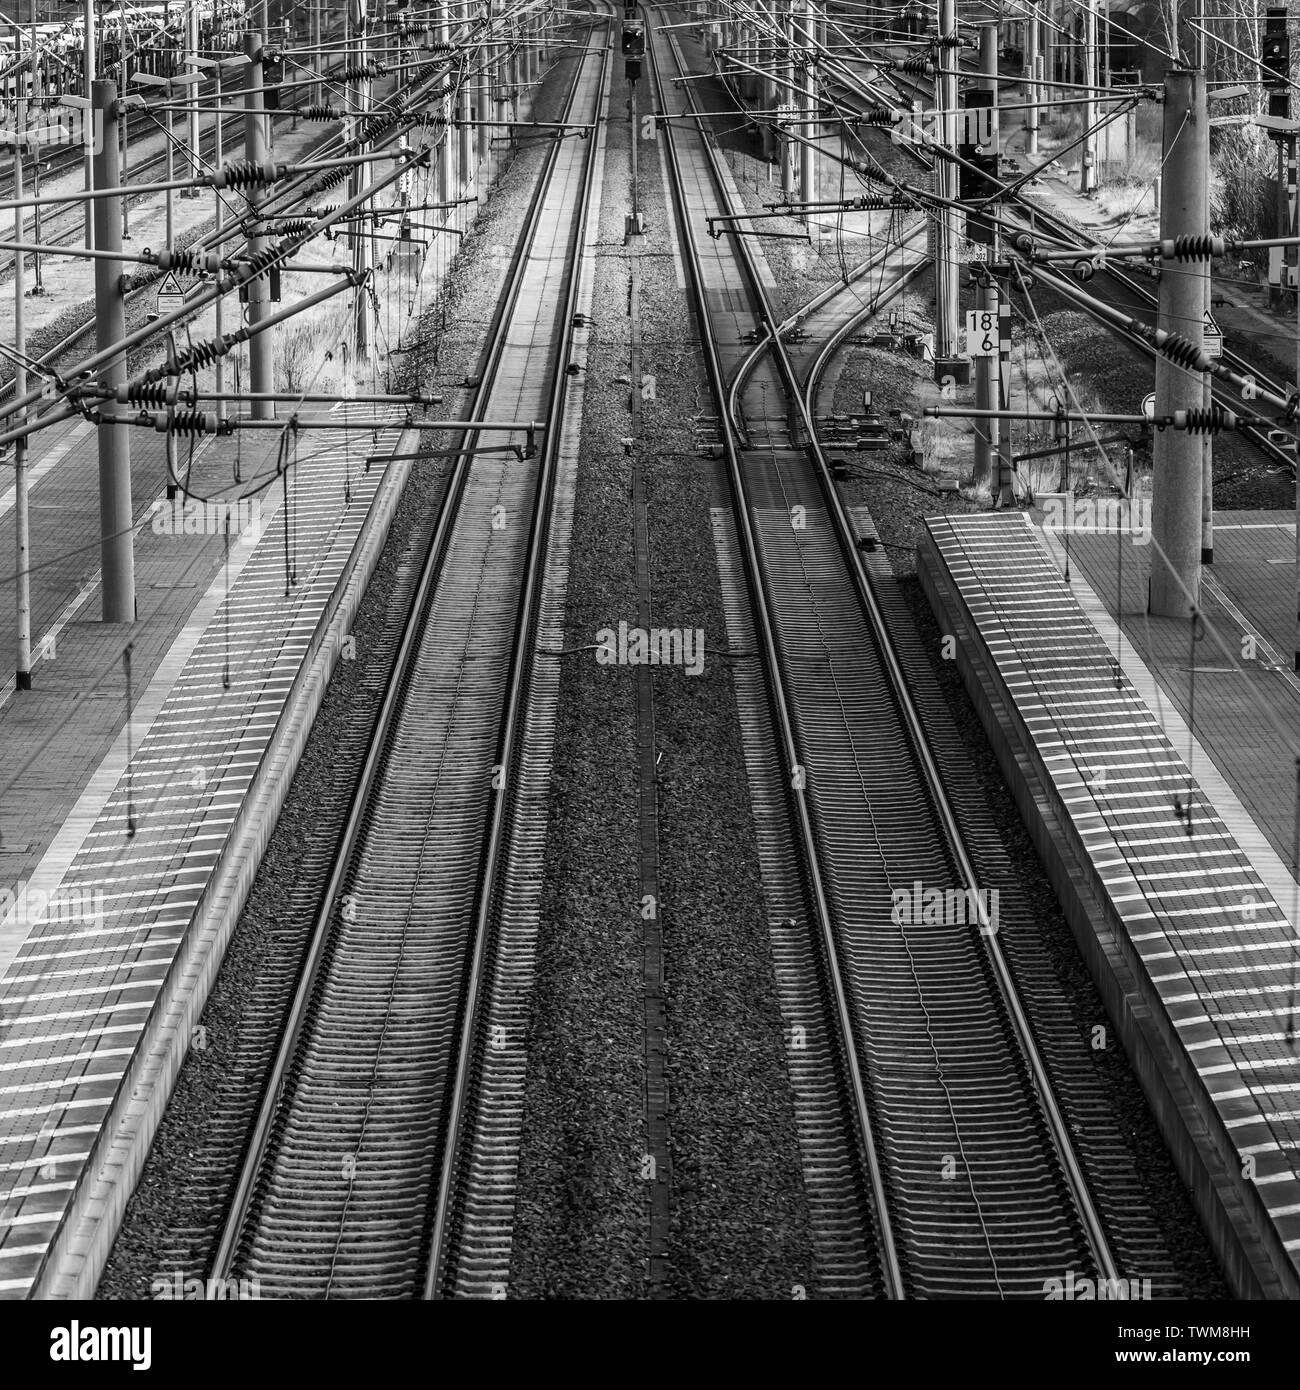 Perspective view of railway tracks with overhead lines next to a platform, monochrom Stock Photo